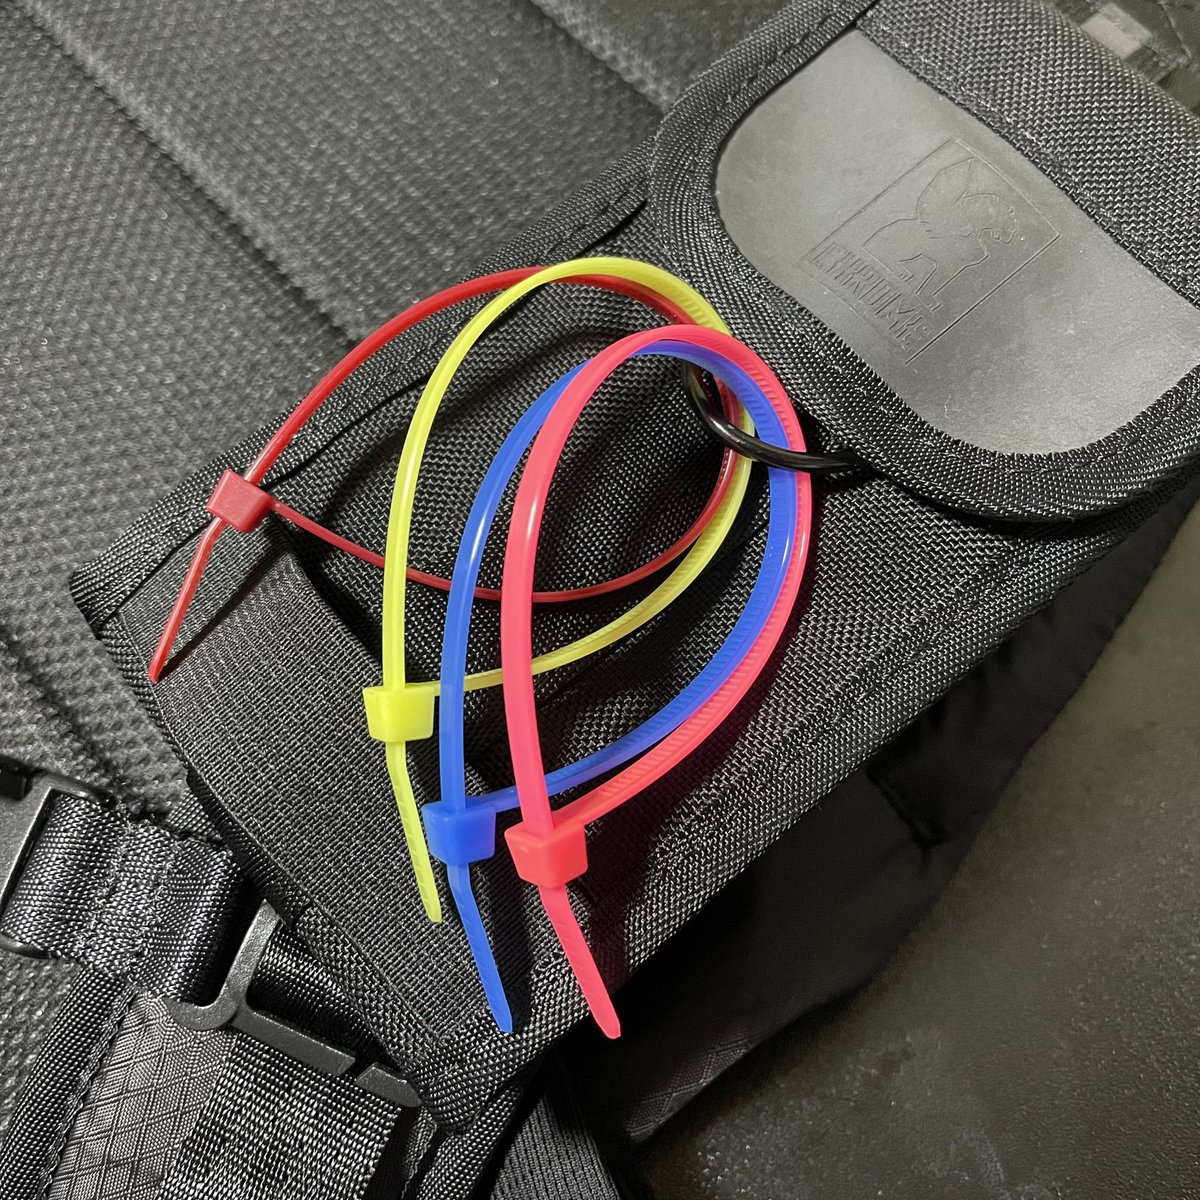 #cableties